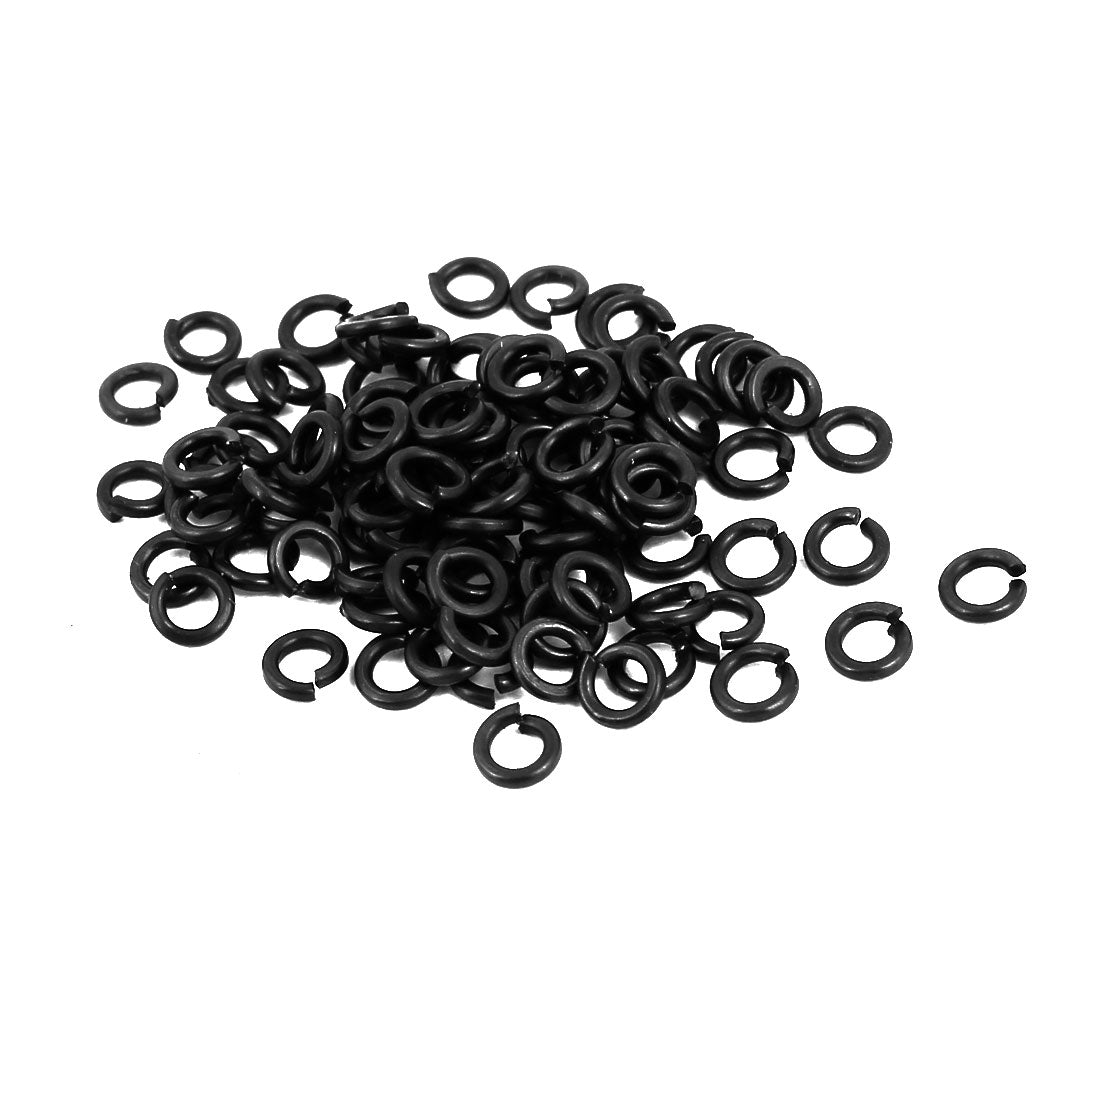 uxcell Uxcell 2mm Fitting Dia Carbon Steel Square Section Split Lock Washer 100pcs